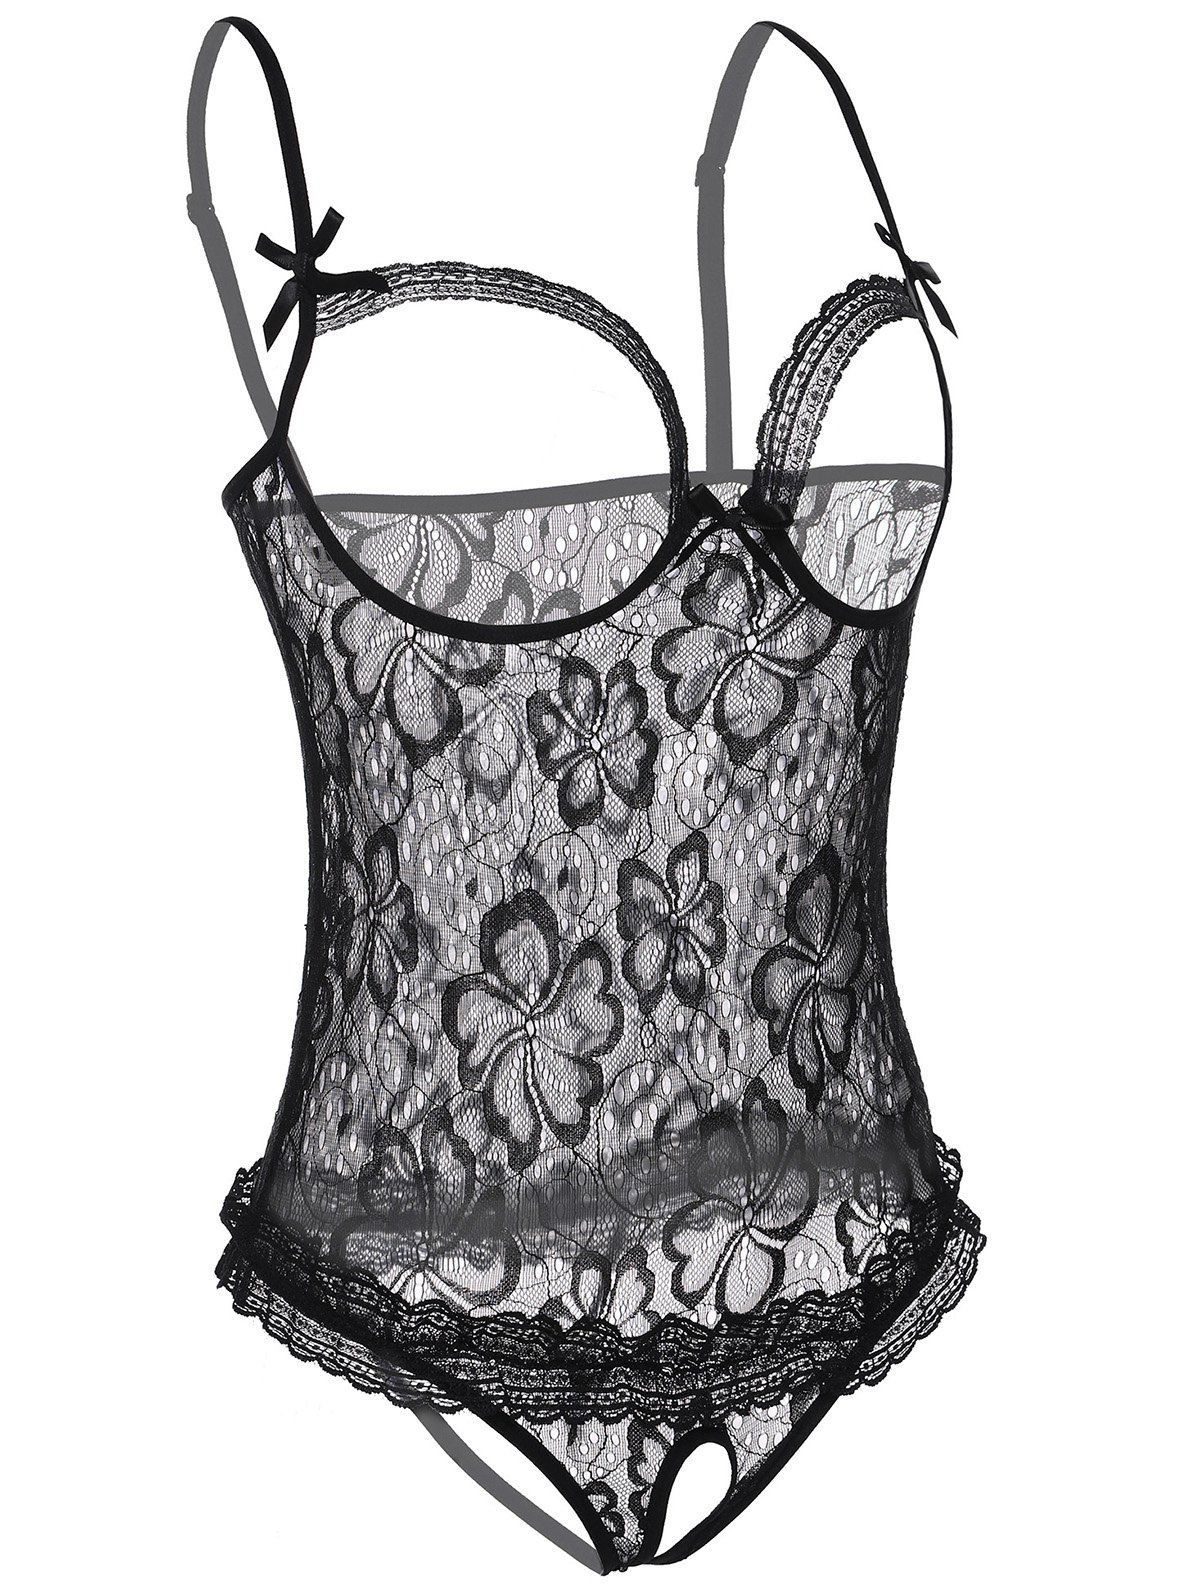 [23% OFF] 2020 Crotchless Open Cup Lace Lingerie Teddy In BLACK | DressLily